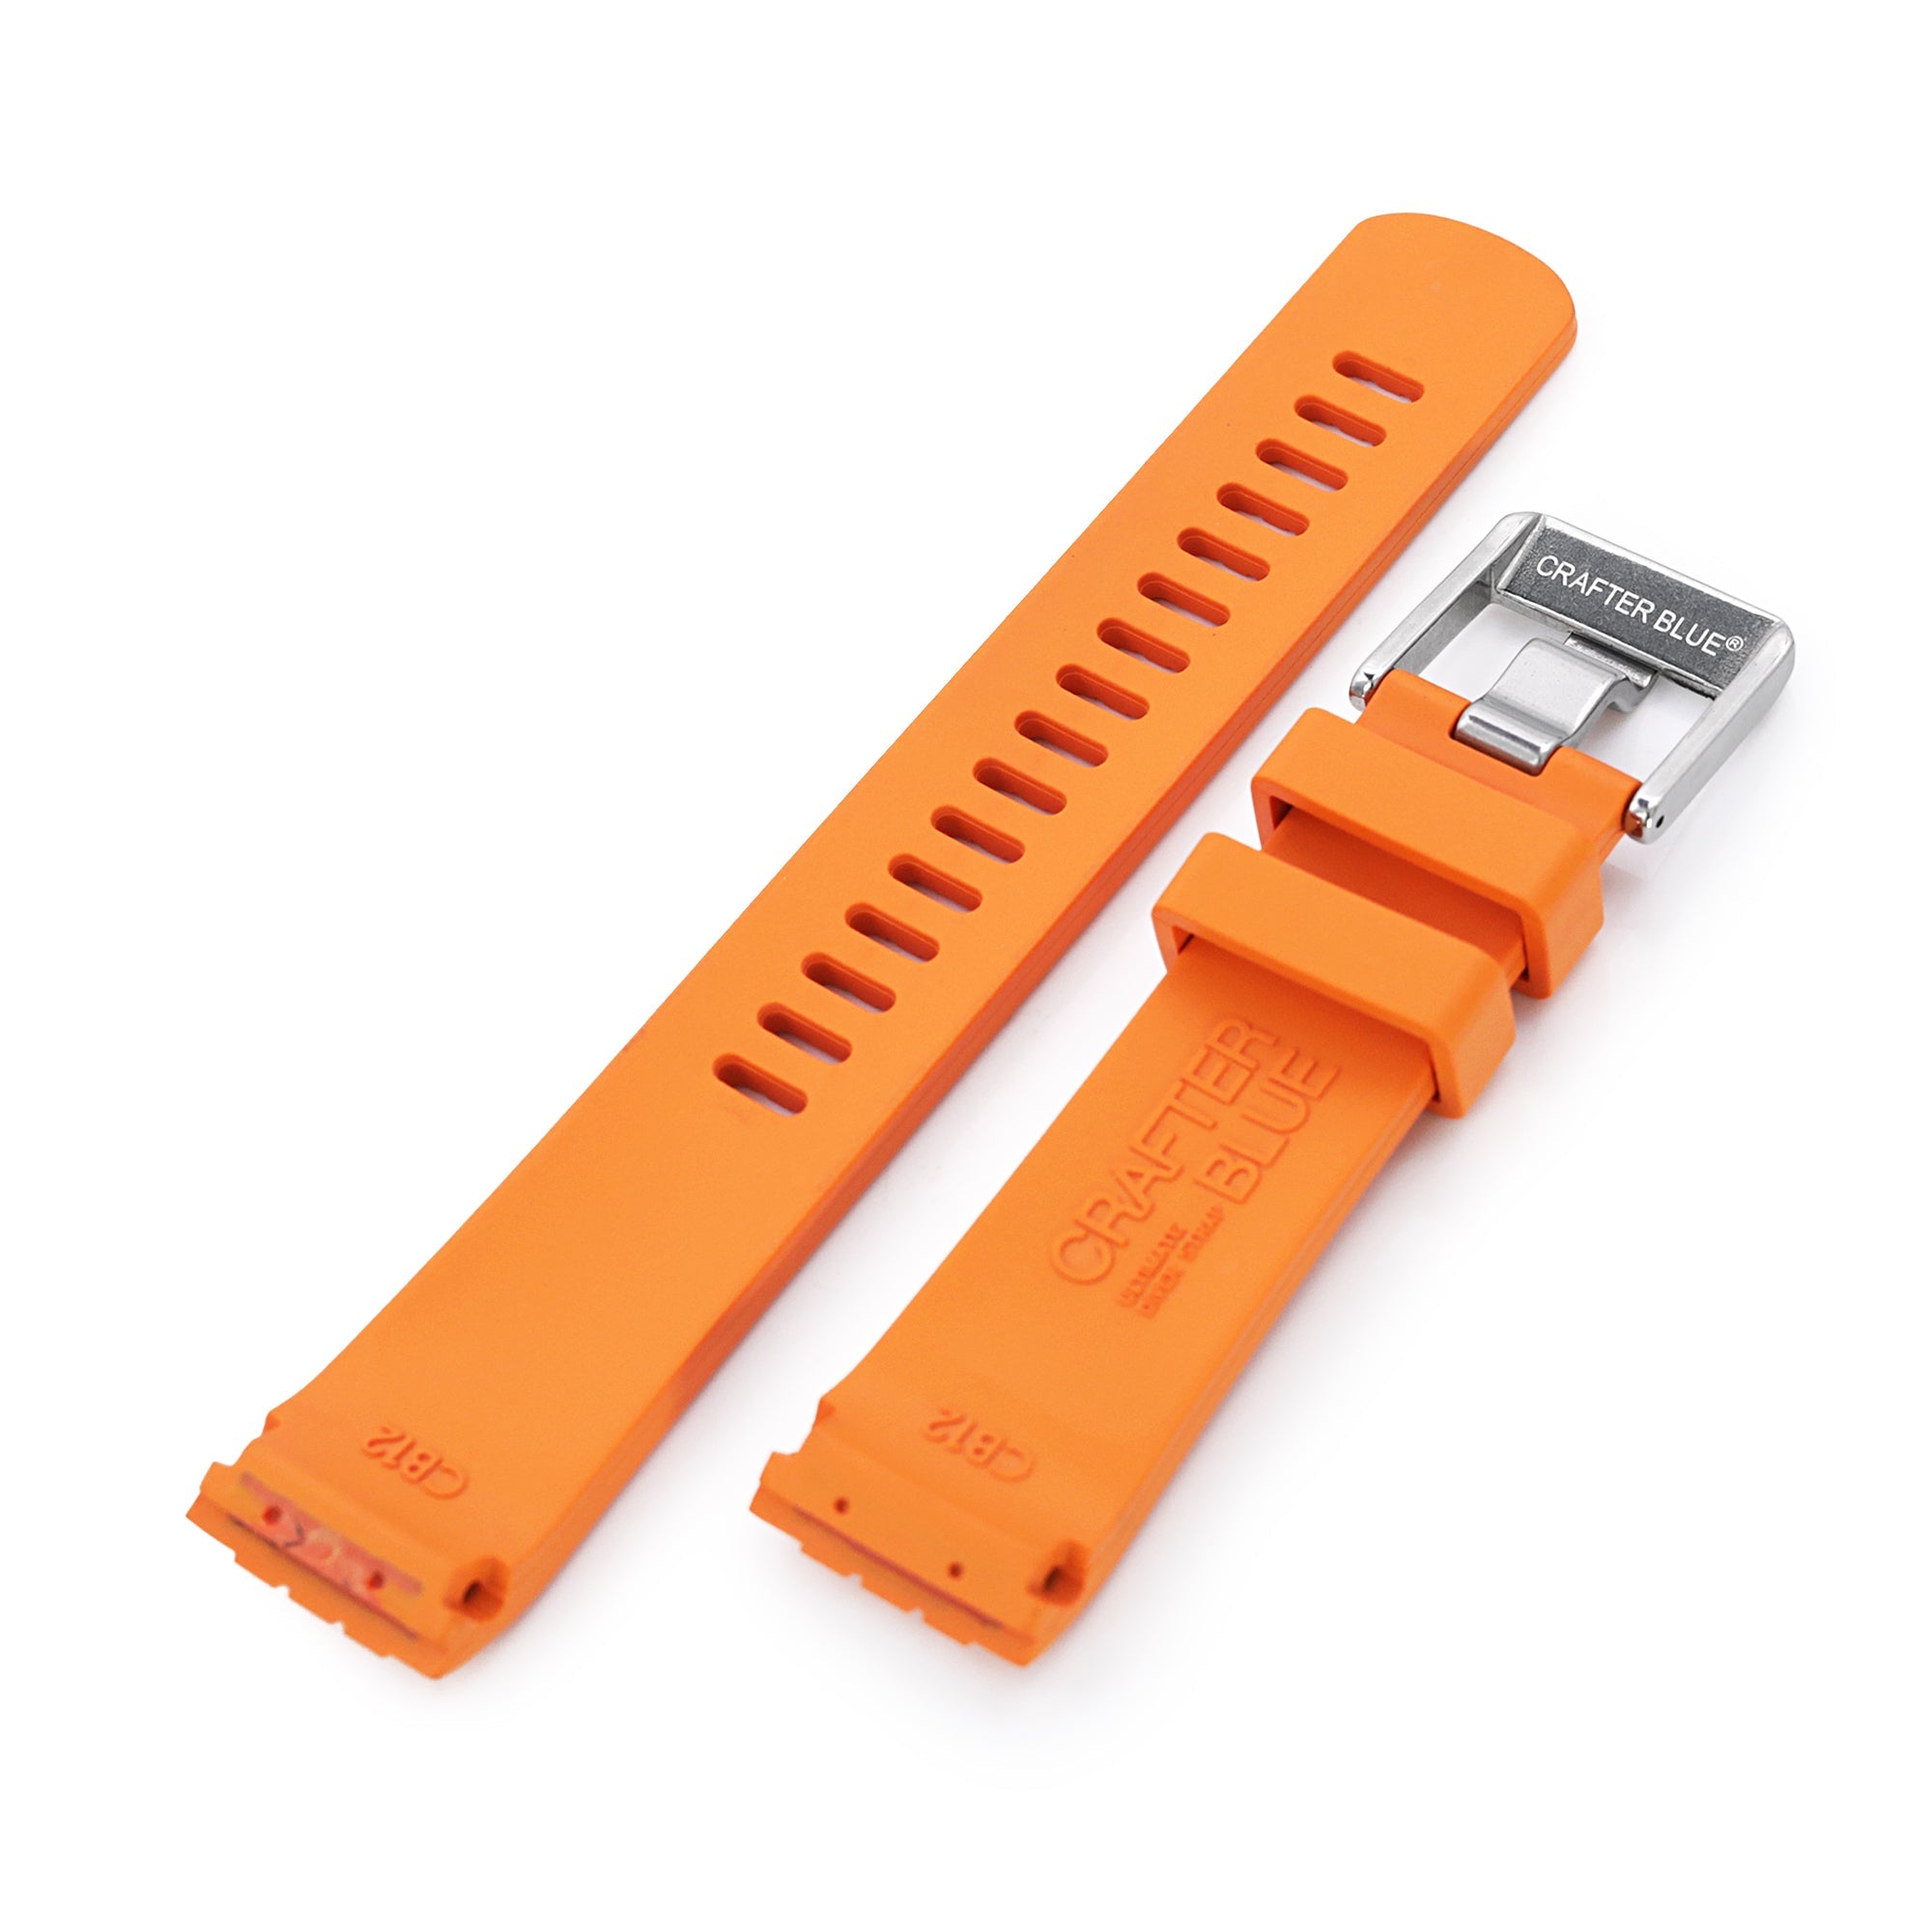 22mm Crafter Blue - CB12 Orange Rubber Curved Lug Watch Strap compatible with Seiko new Turtles SRP777 Strapcode Watch Bands